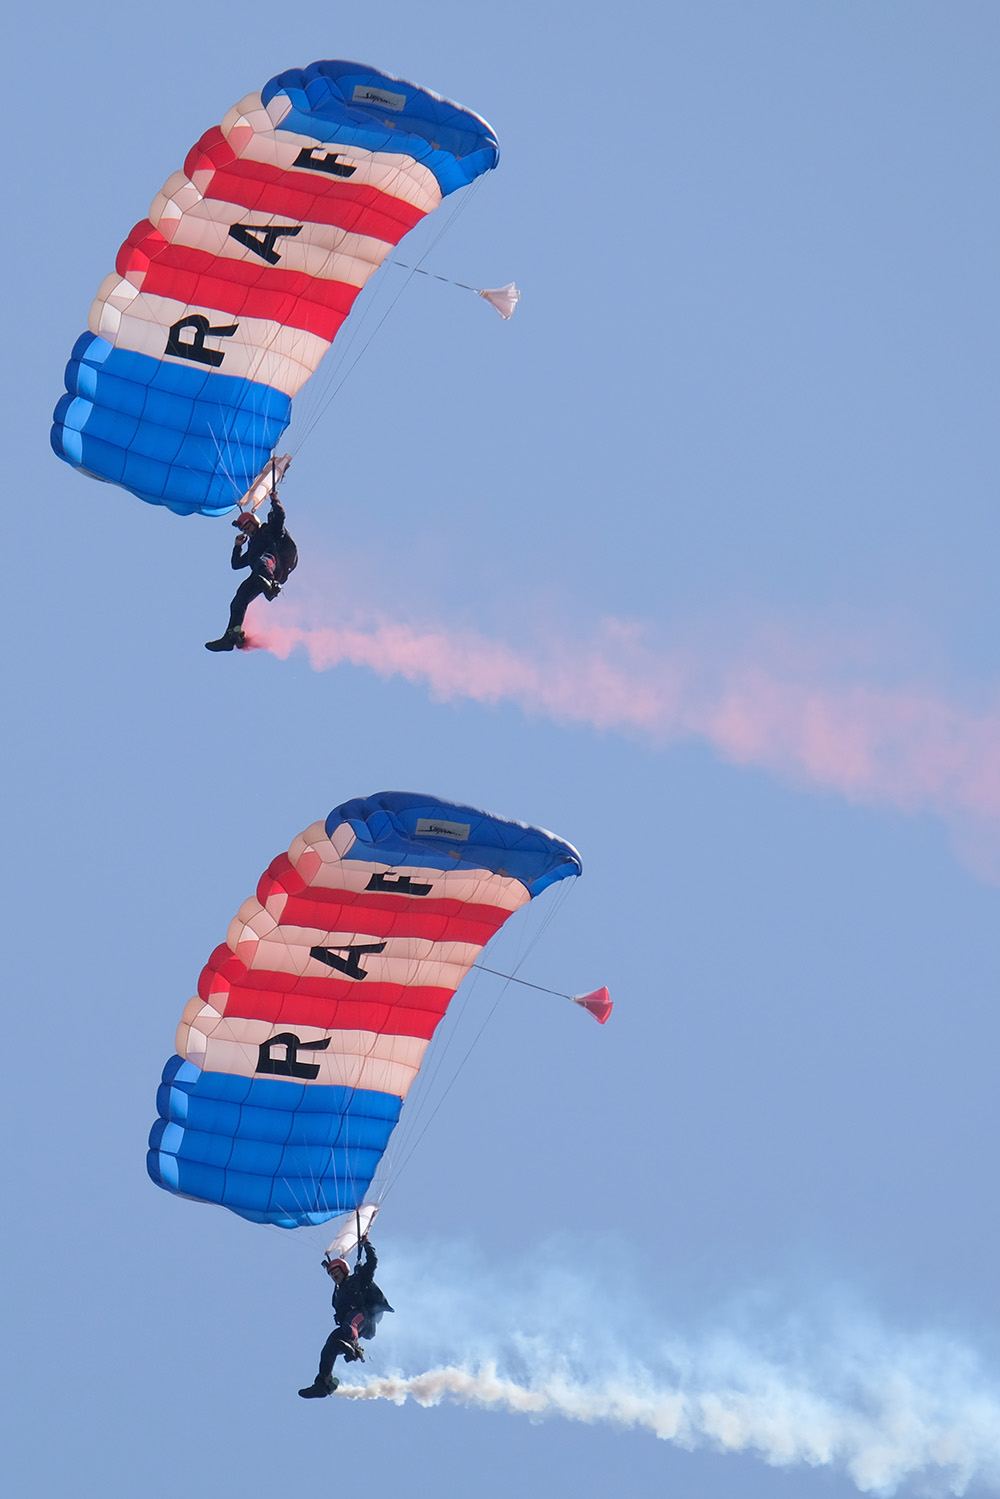 The RAF Falcons, the RAF’s official parachute display team.